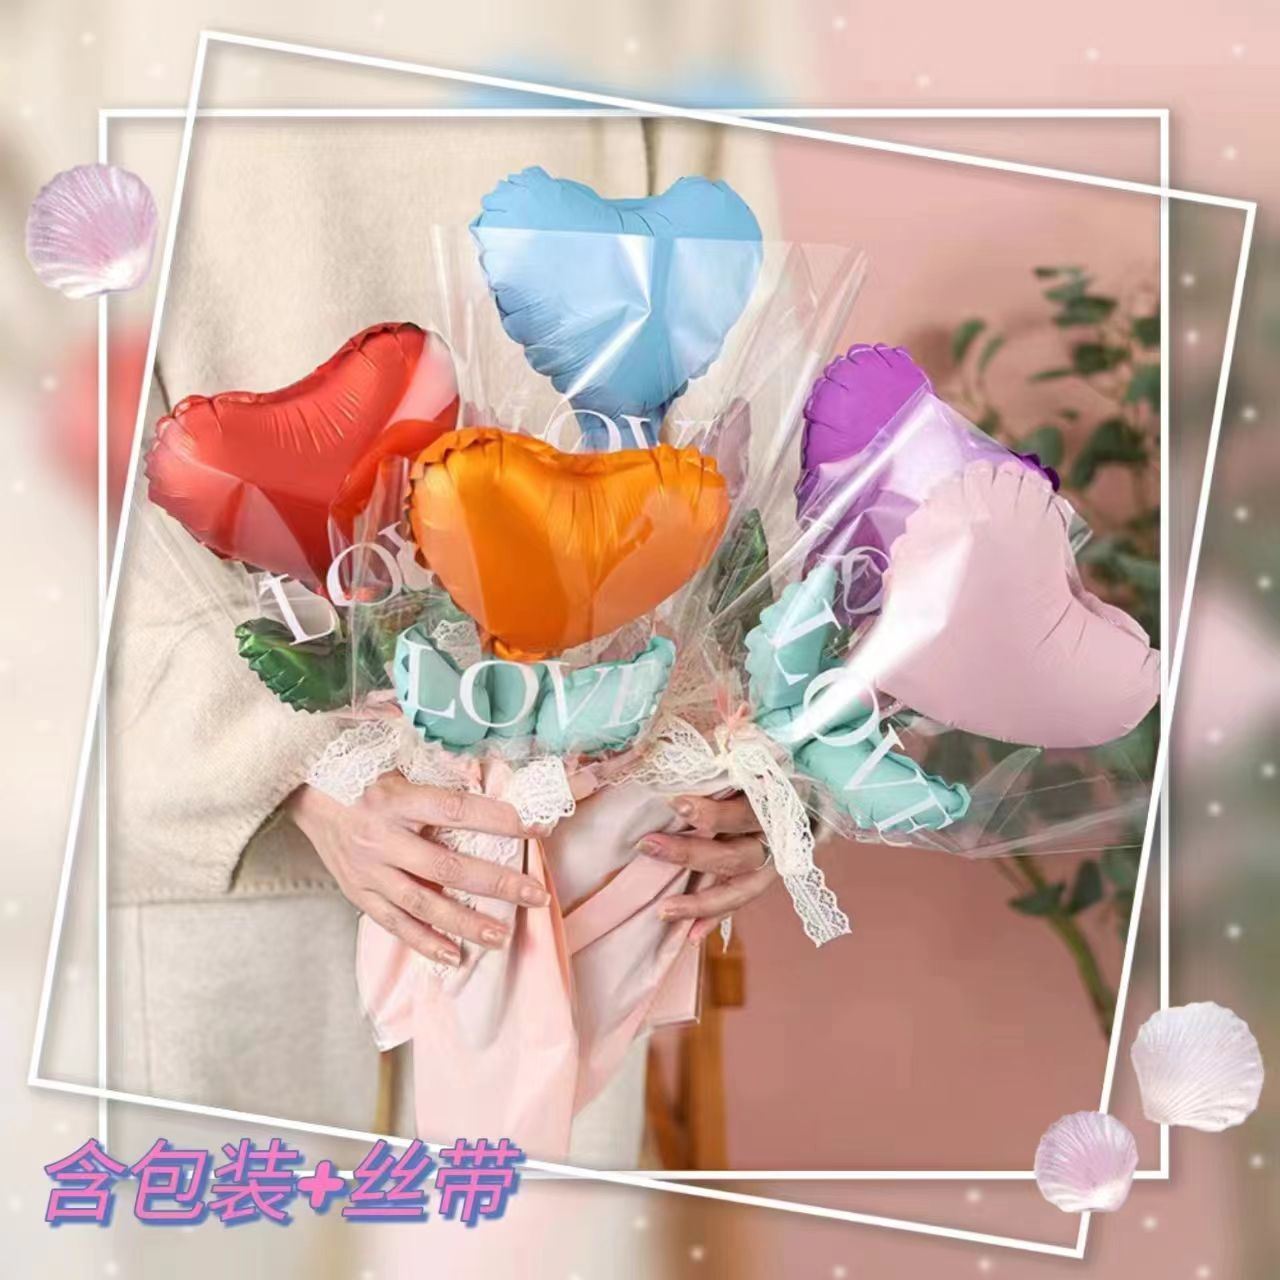 Mother's Day Goddess's Day Valentine's Day holding love flower balloon kindergarten mall activities gifts